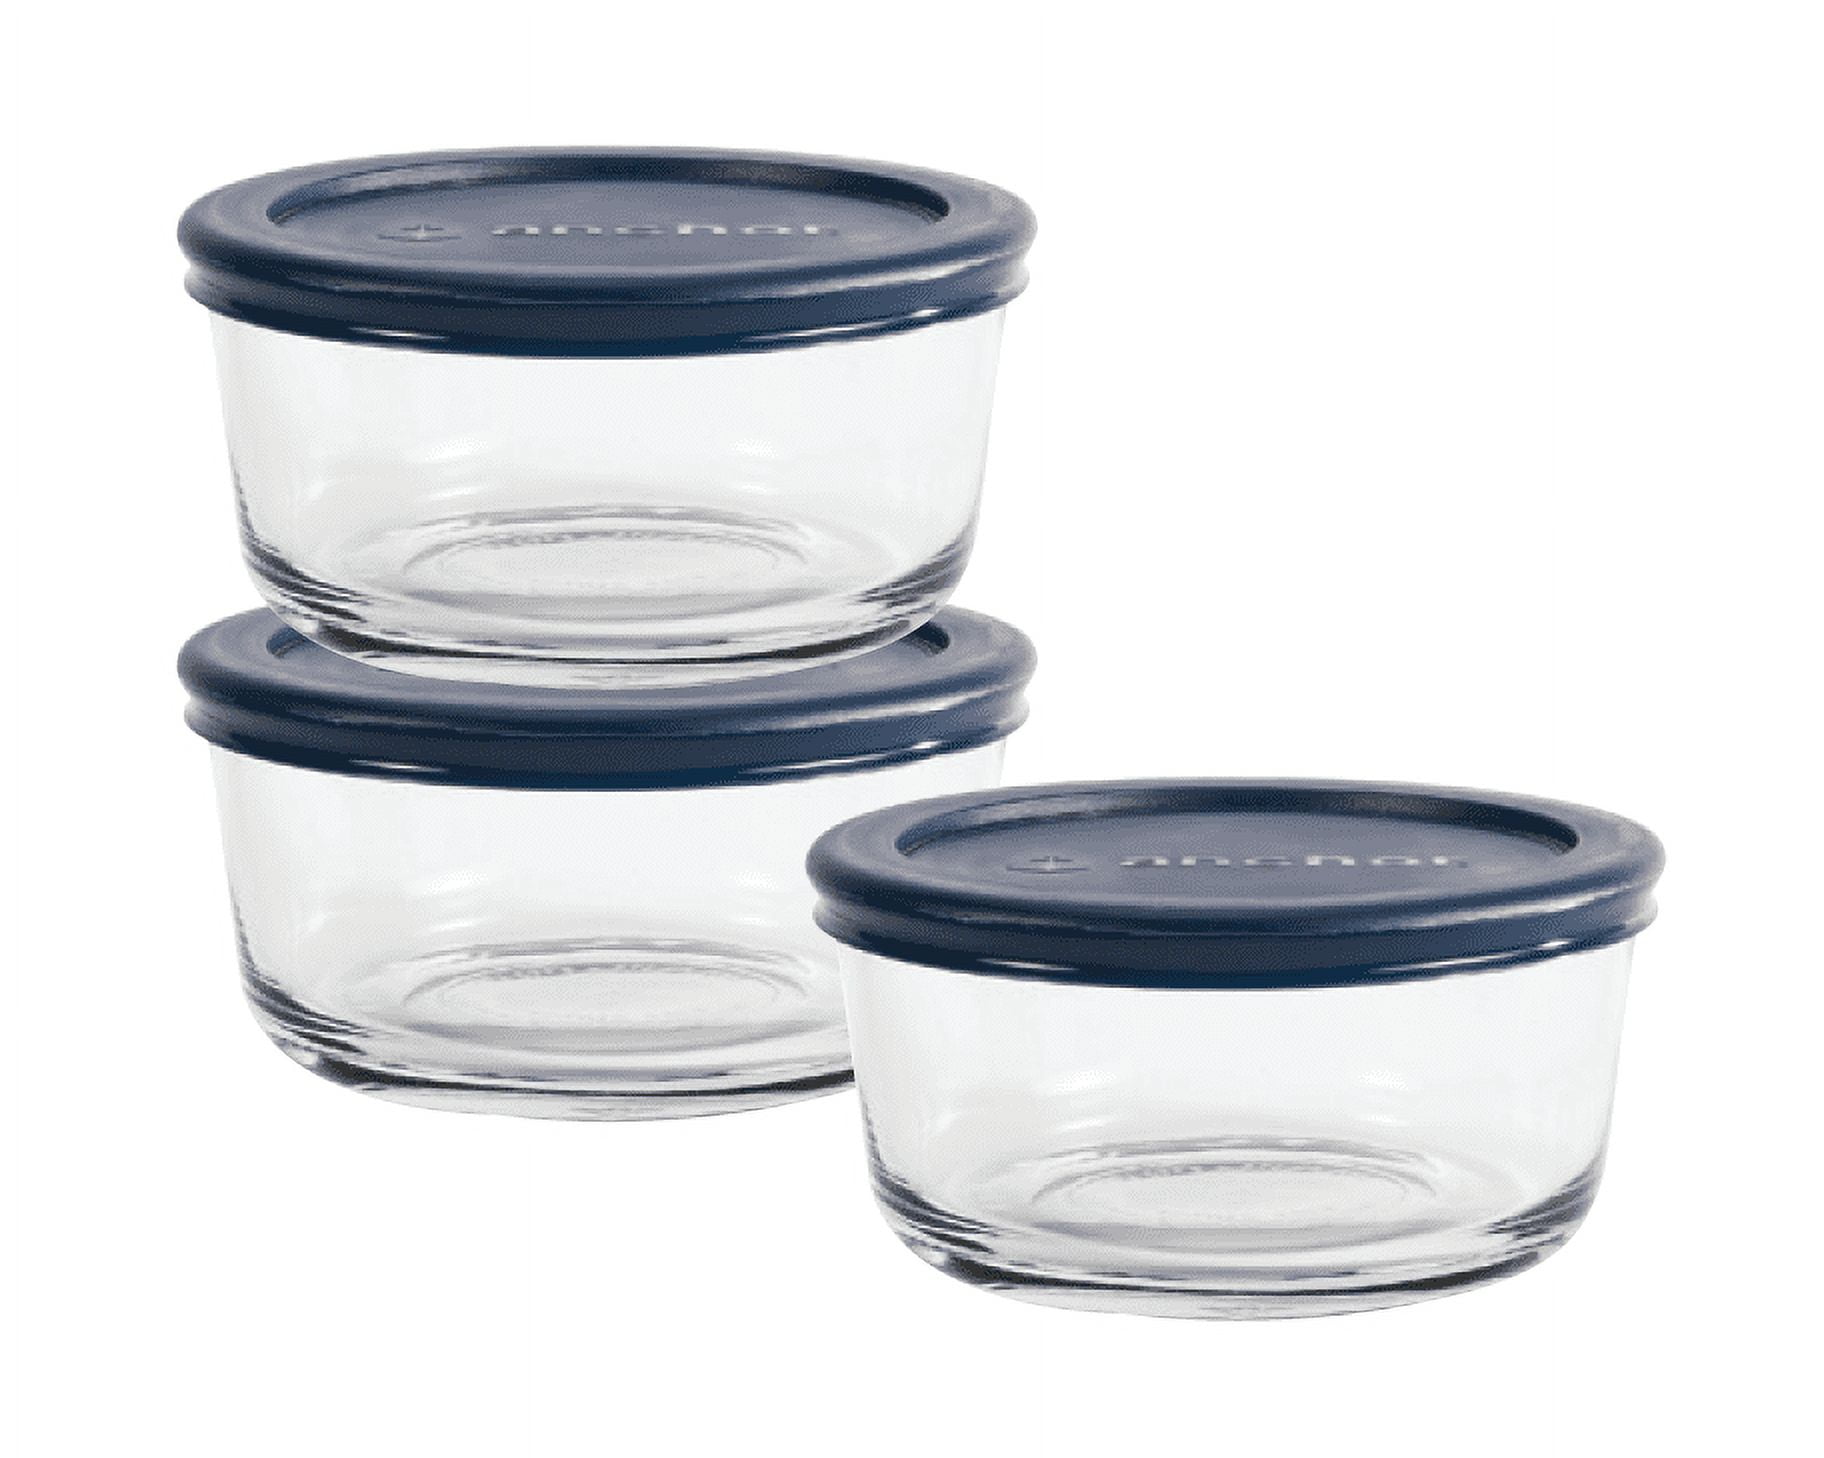 2-Piece Round Glass Baking Dish Set with Bamboo Lids - Oven Safe